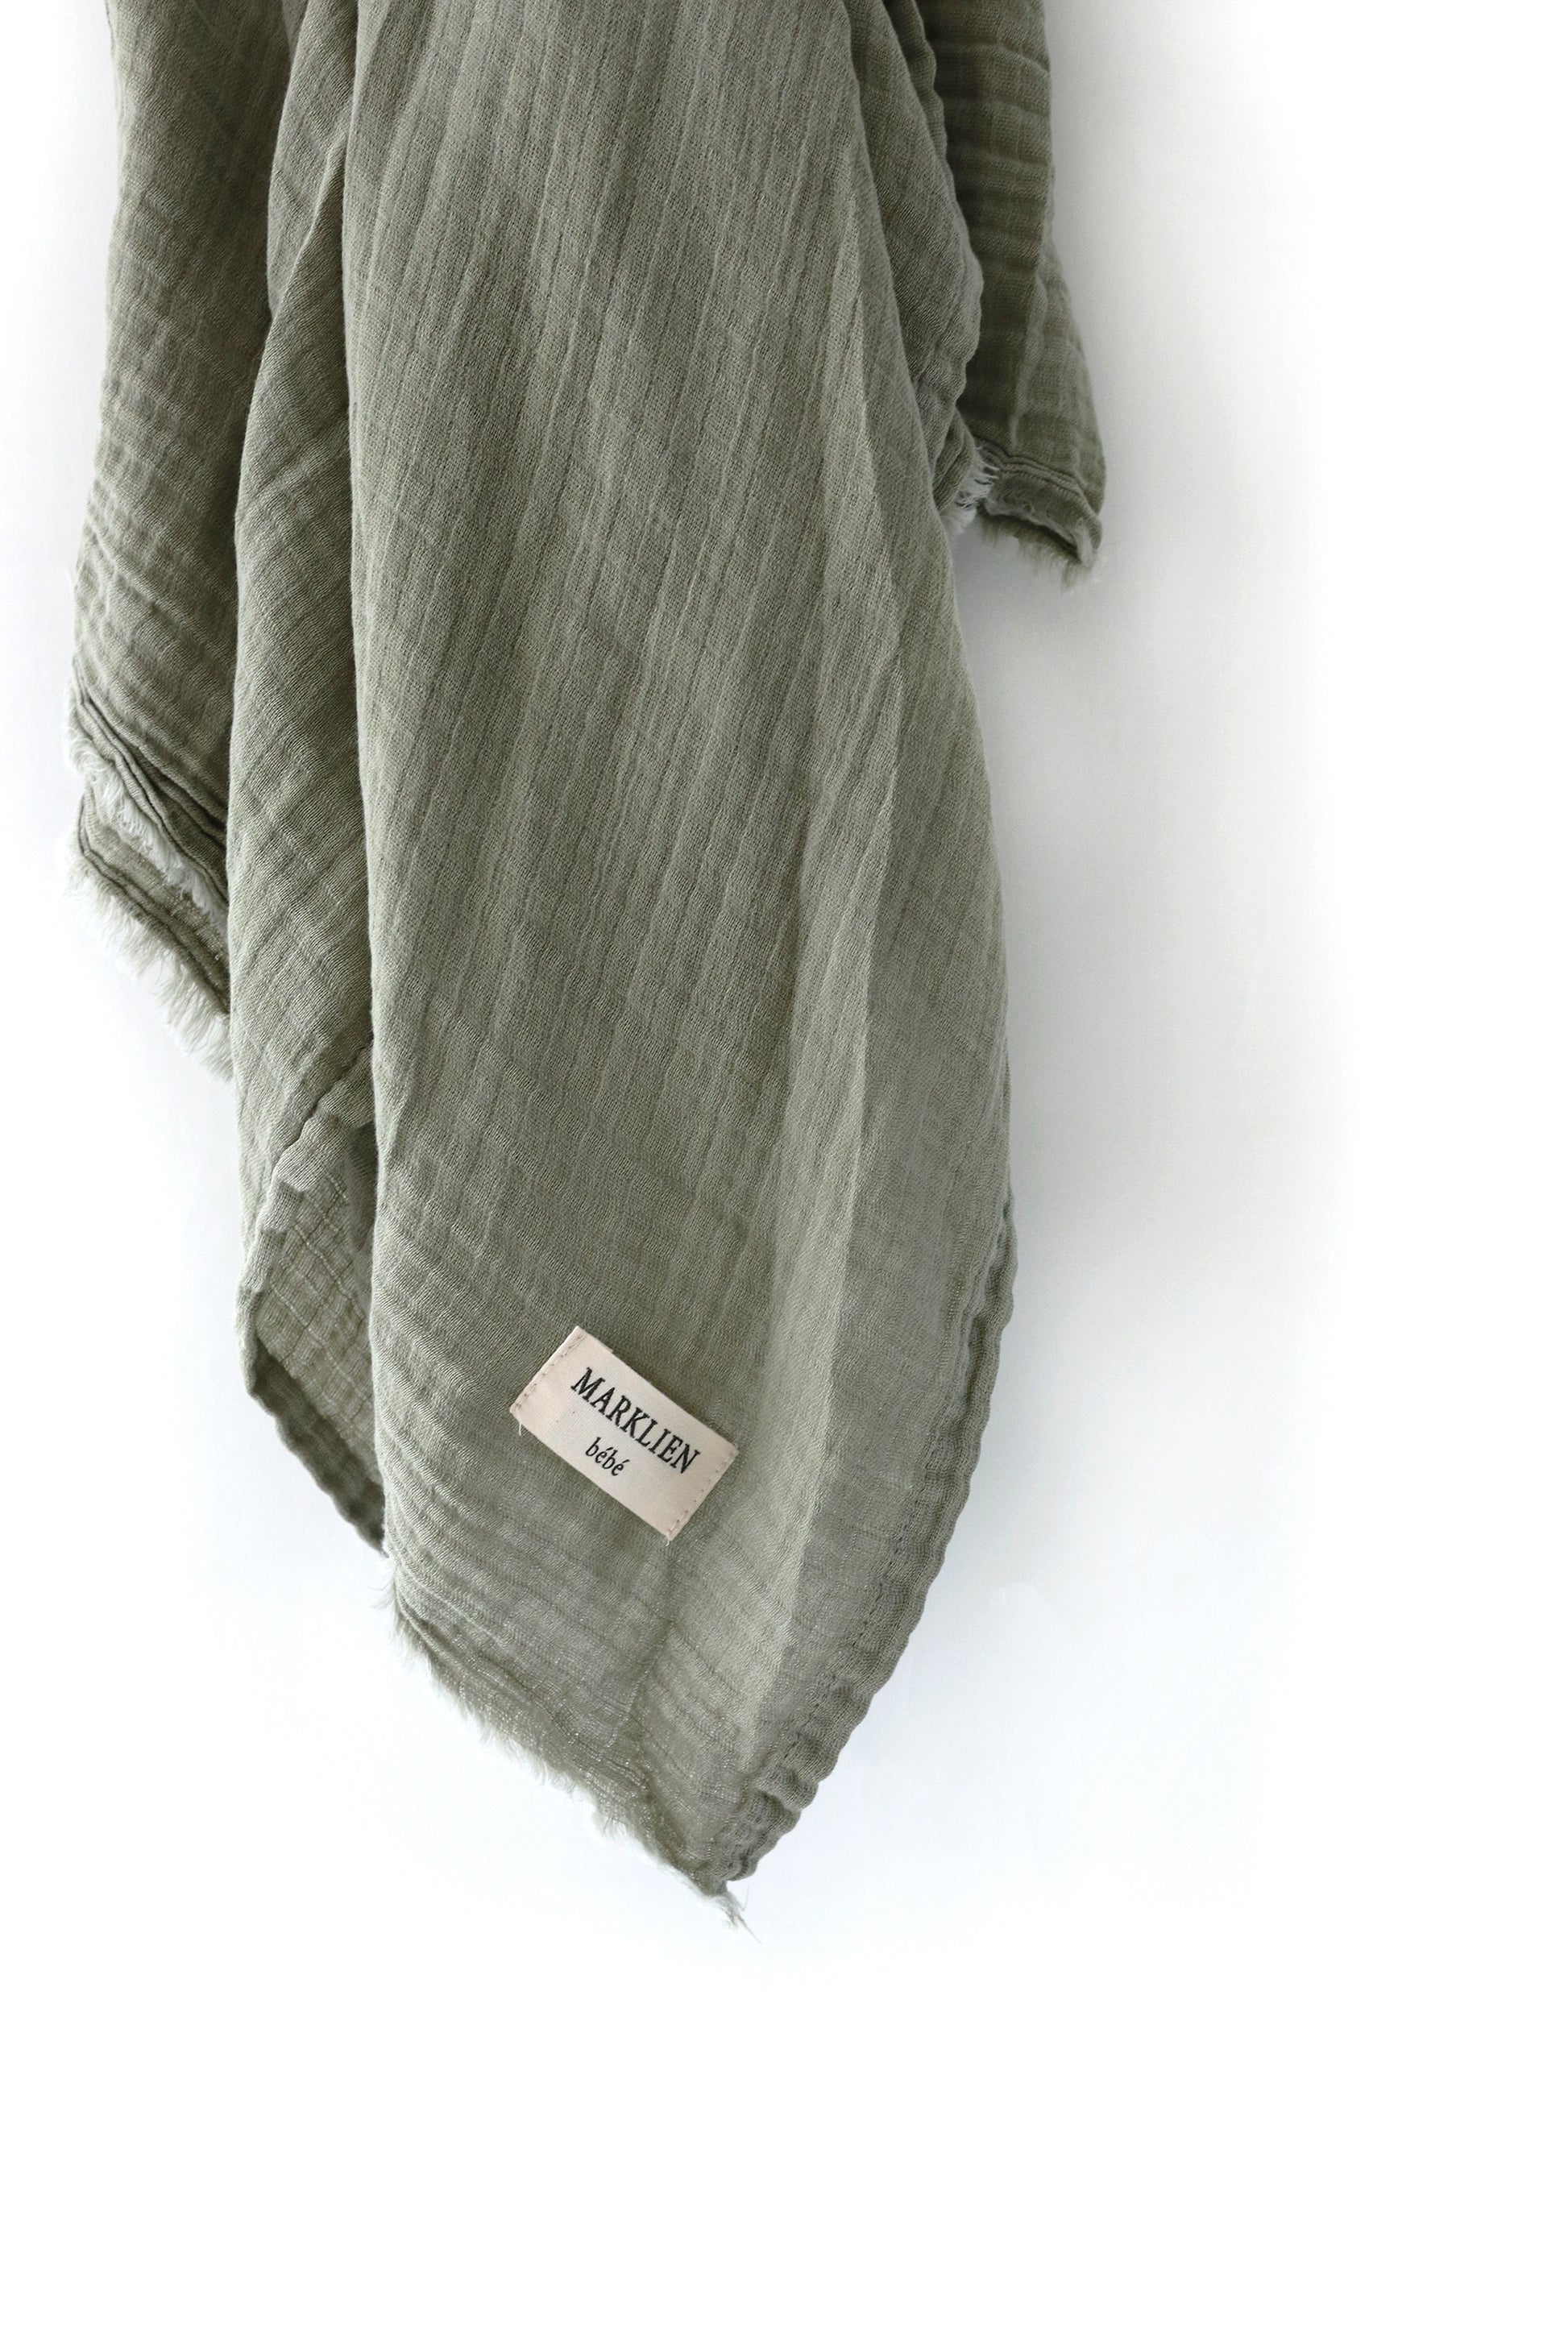 2 Layer Muslin Swaddle  100% muslin cotton gender neutral earthy tone large baby swaddle.  Perfect size for swaddle, blanket, sun shield, nursing cover and more! 